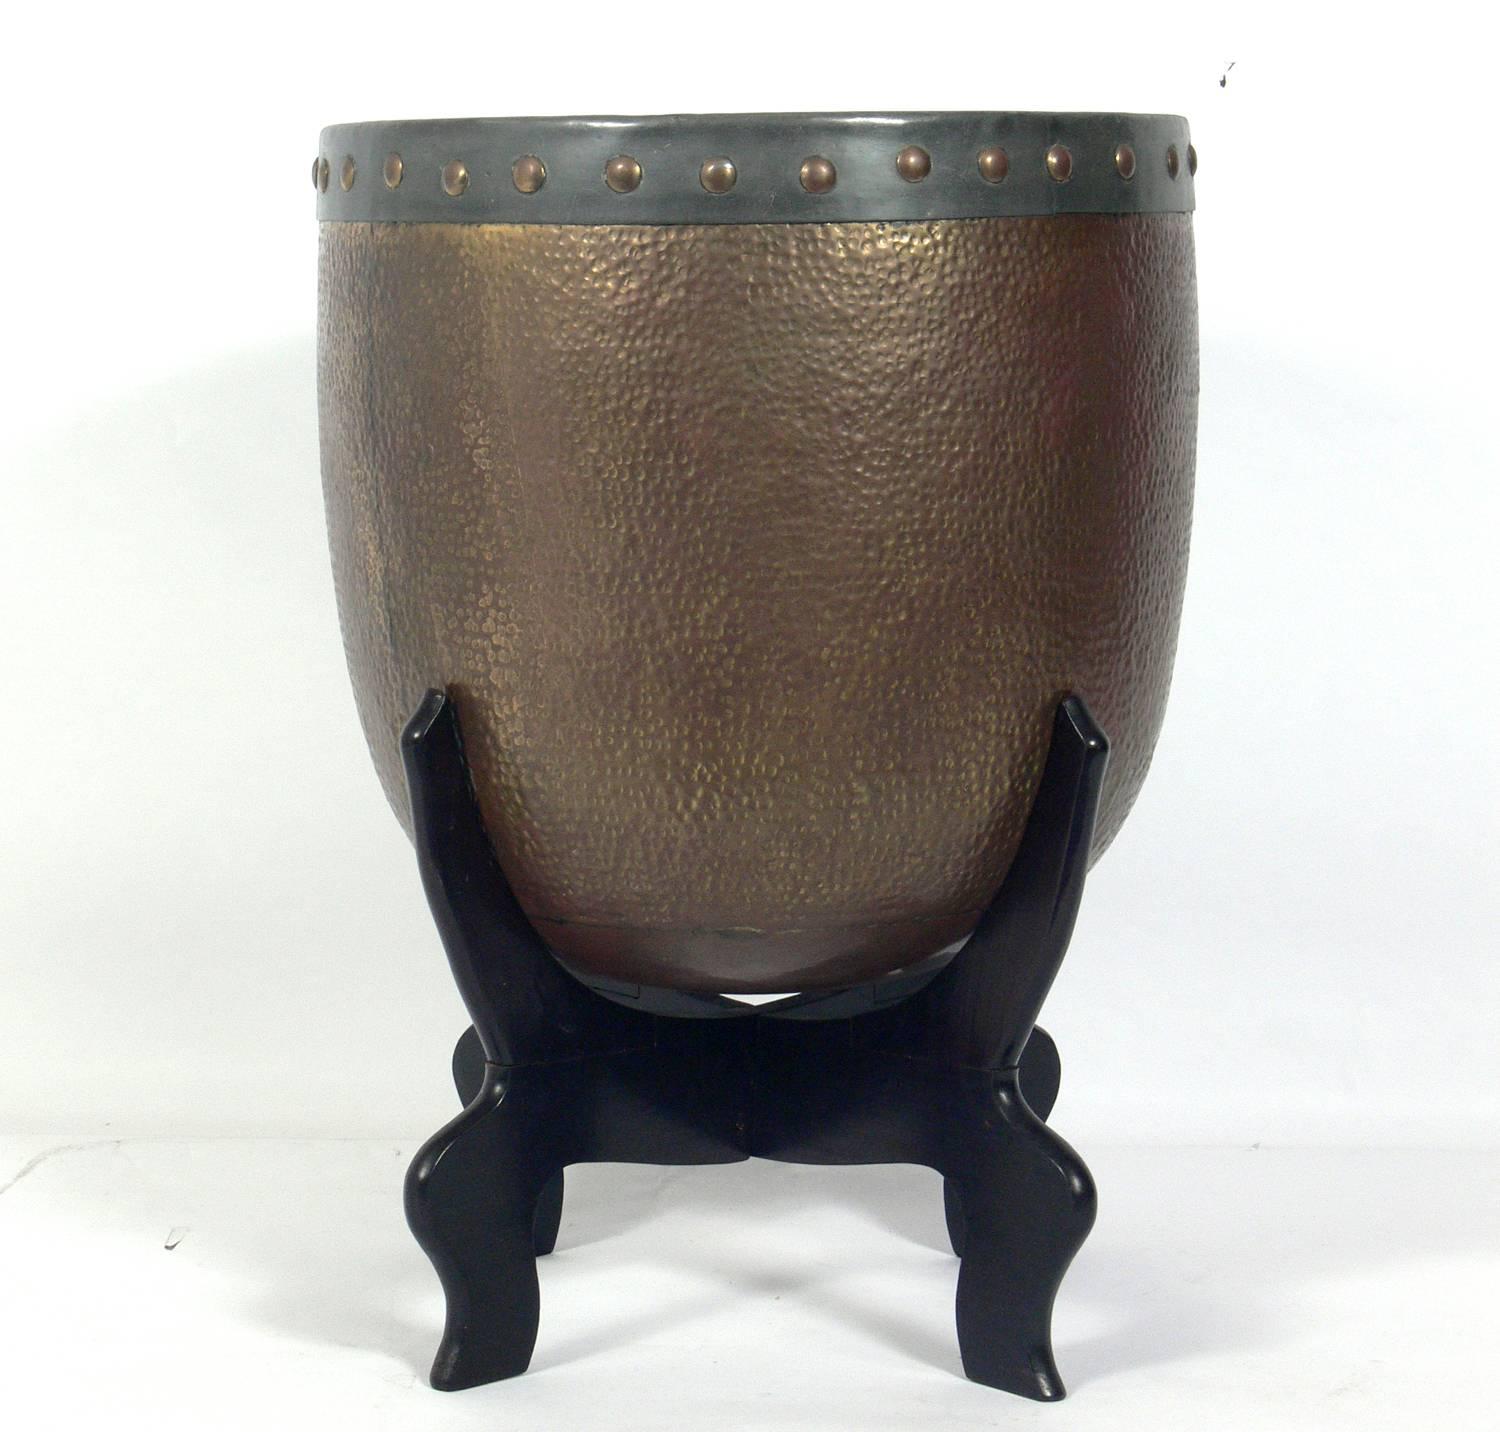 Large-scale Asian brass and copper urn planter on stand, circa 1950s. Retains warm original patina to the brass, copper, and the lacquered wood base.